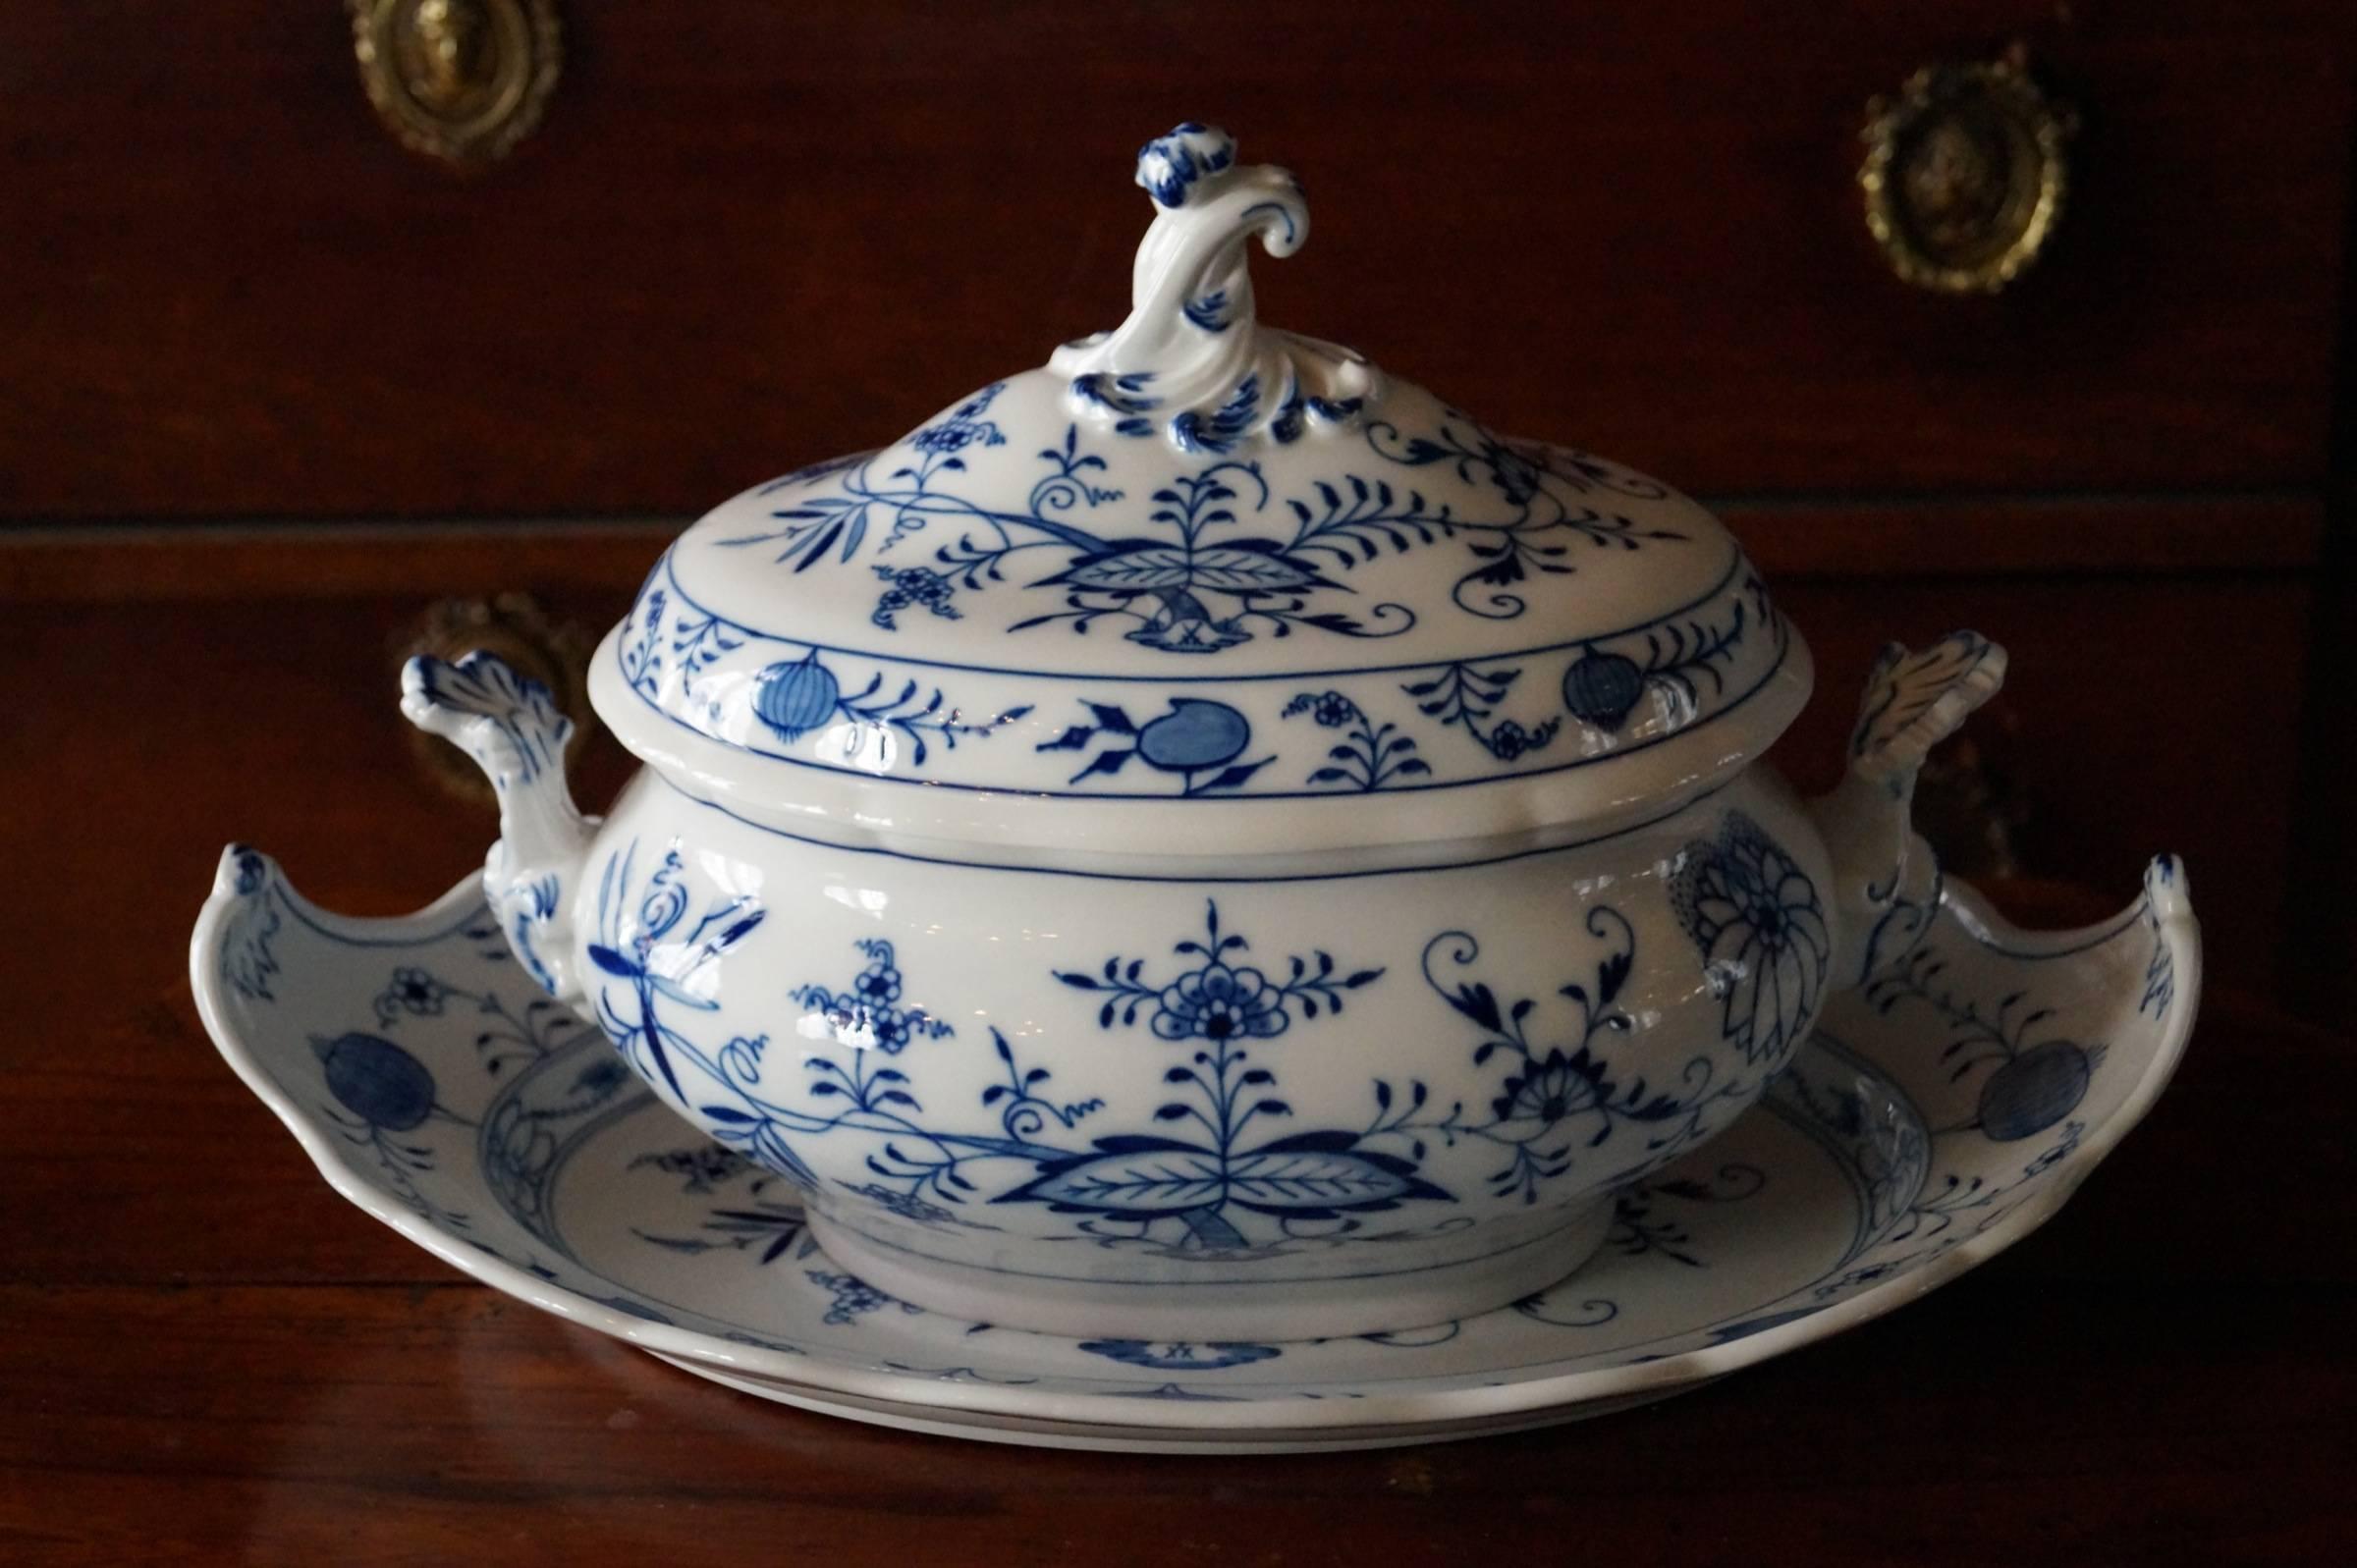 Fabulous hand-painted Meissen tureen with under plate.
Famous blue onion decor.
Germany, 1920s
In perfect condition.

Measures: Tureen 34 cm x 19 cm, height 26 cm
Under plate 42 cm x 31 cm.